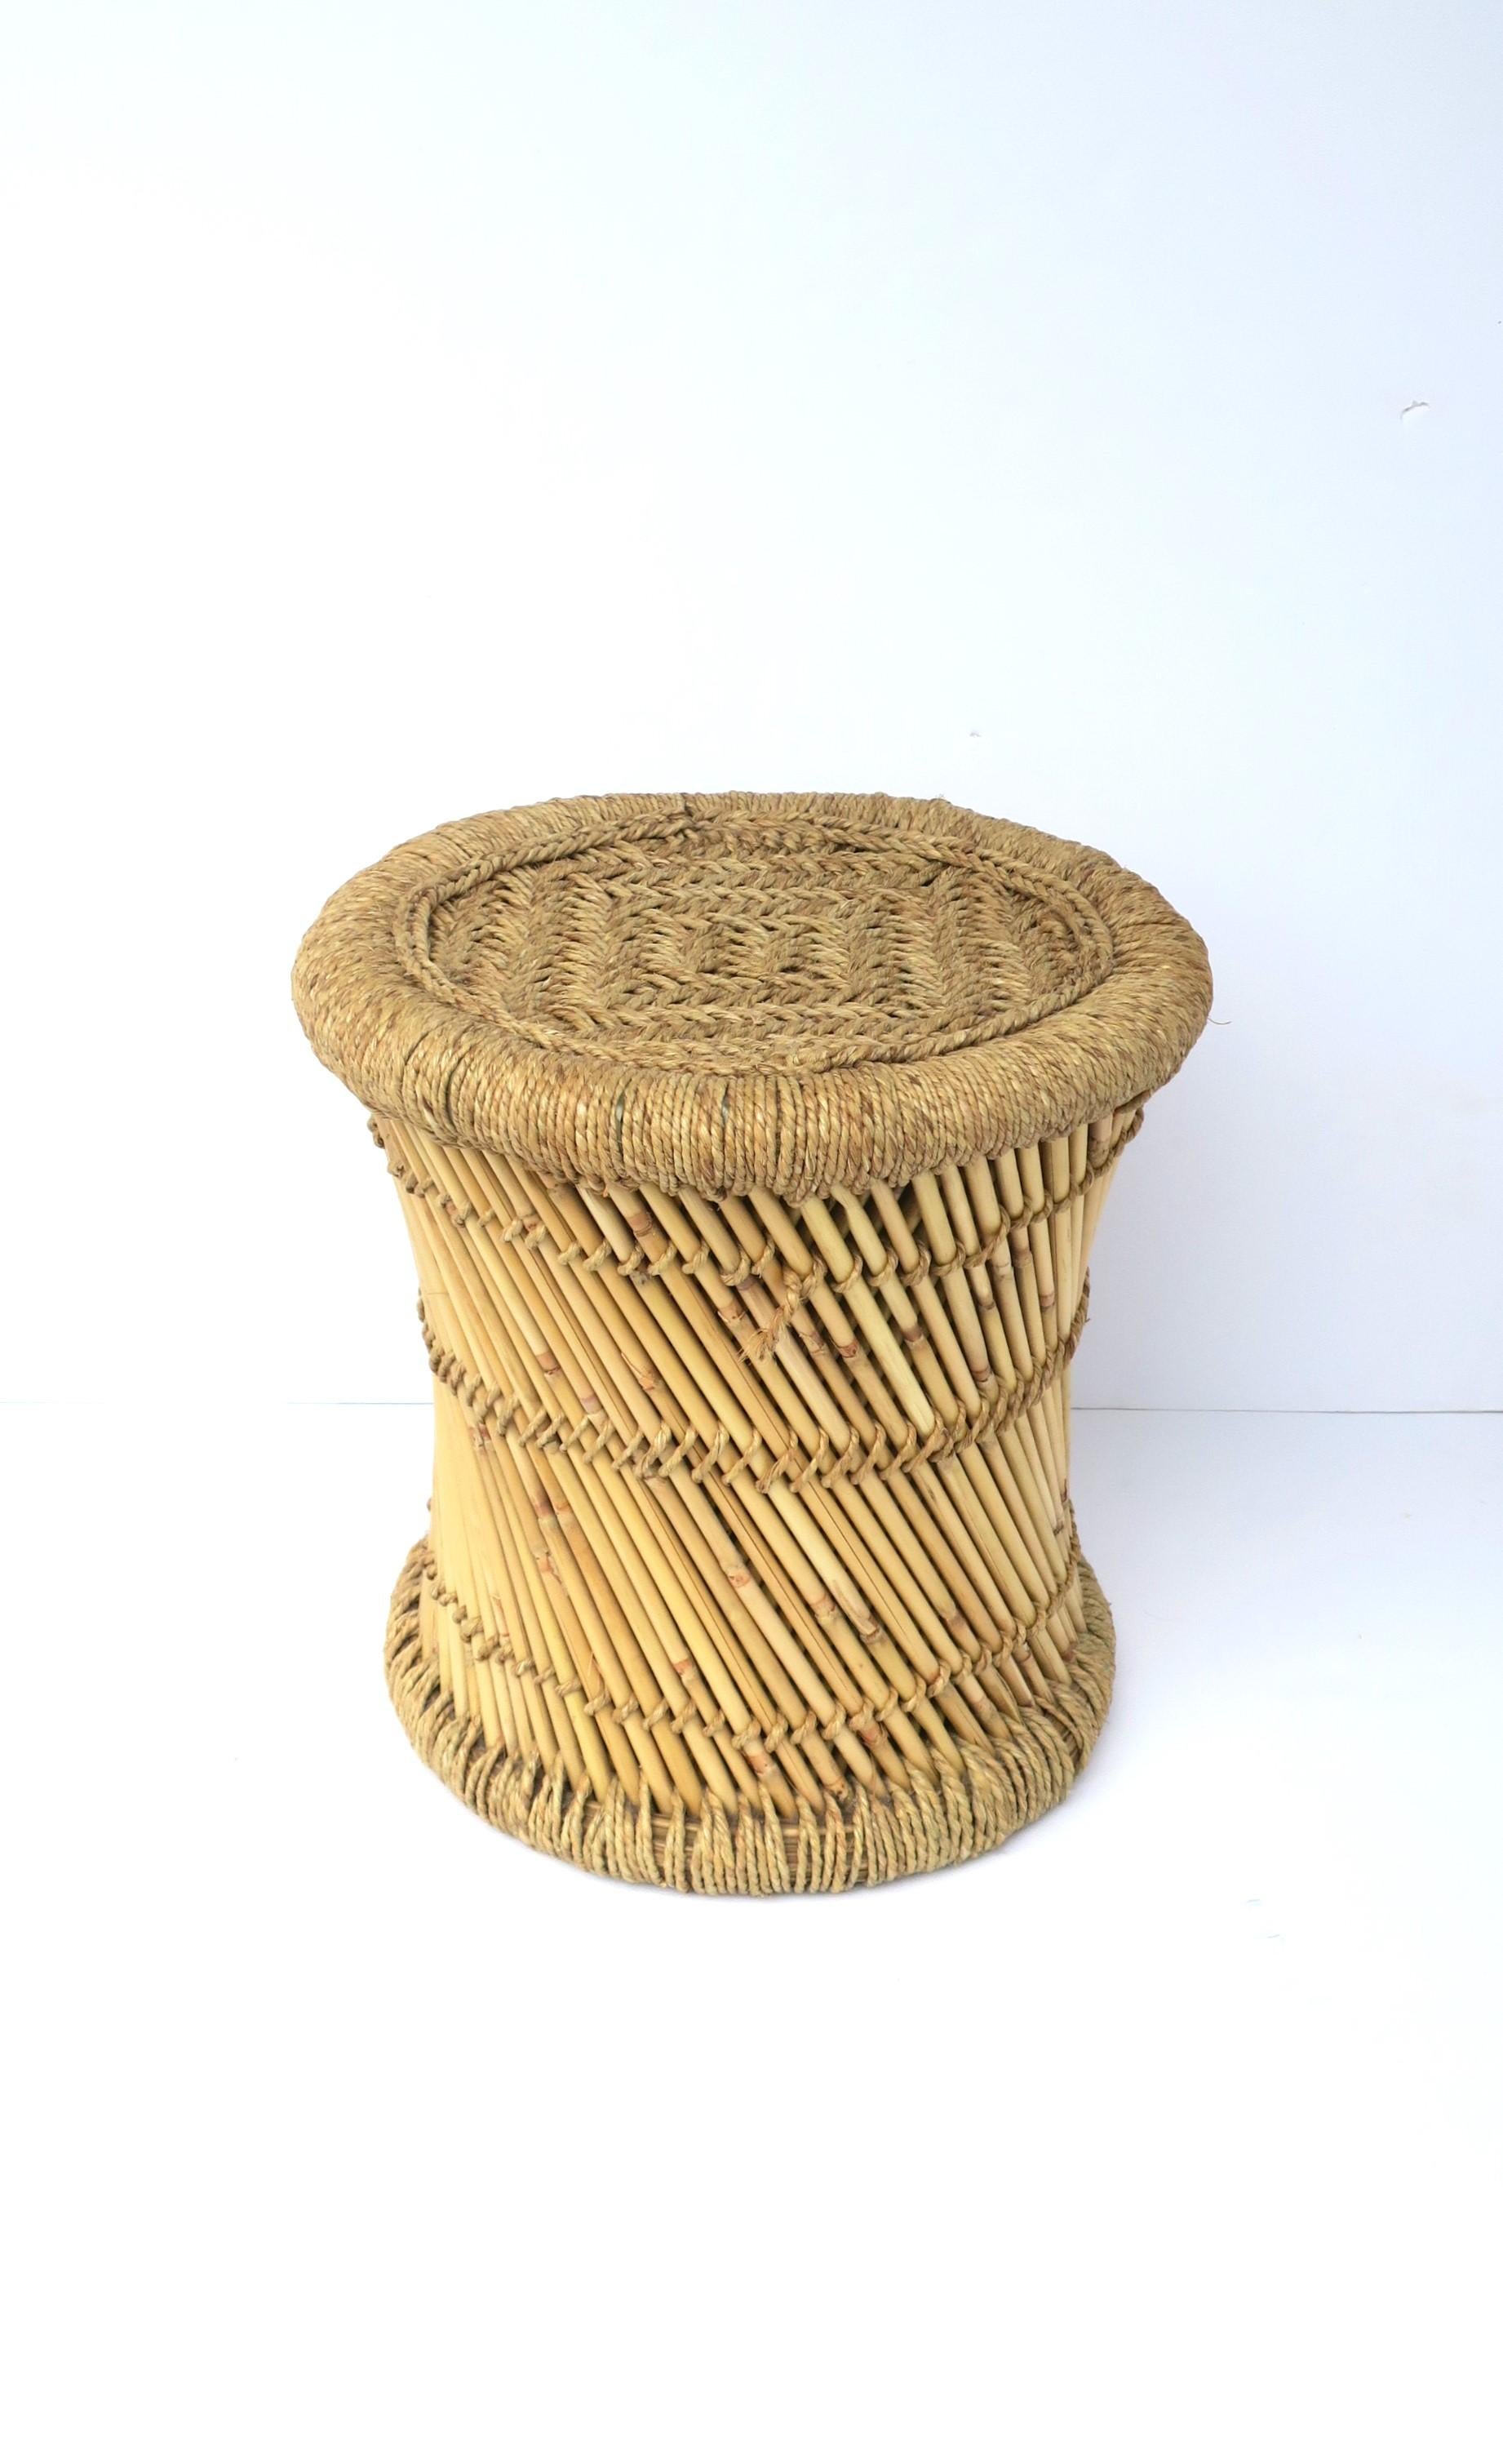 Wicker Reed Stool or Pedestal Drink Table In Good Condition For Sale In New York, NY